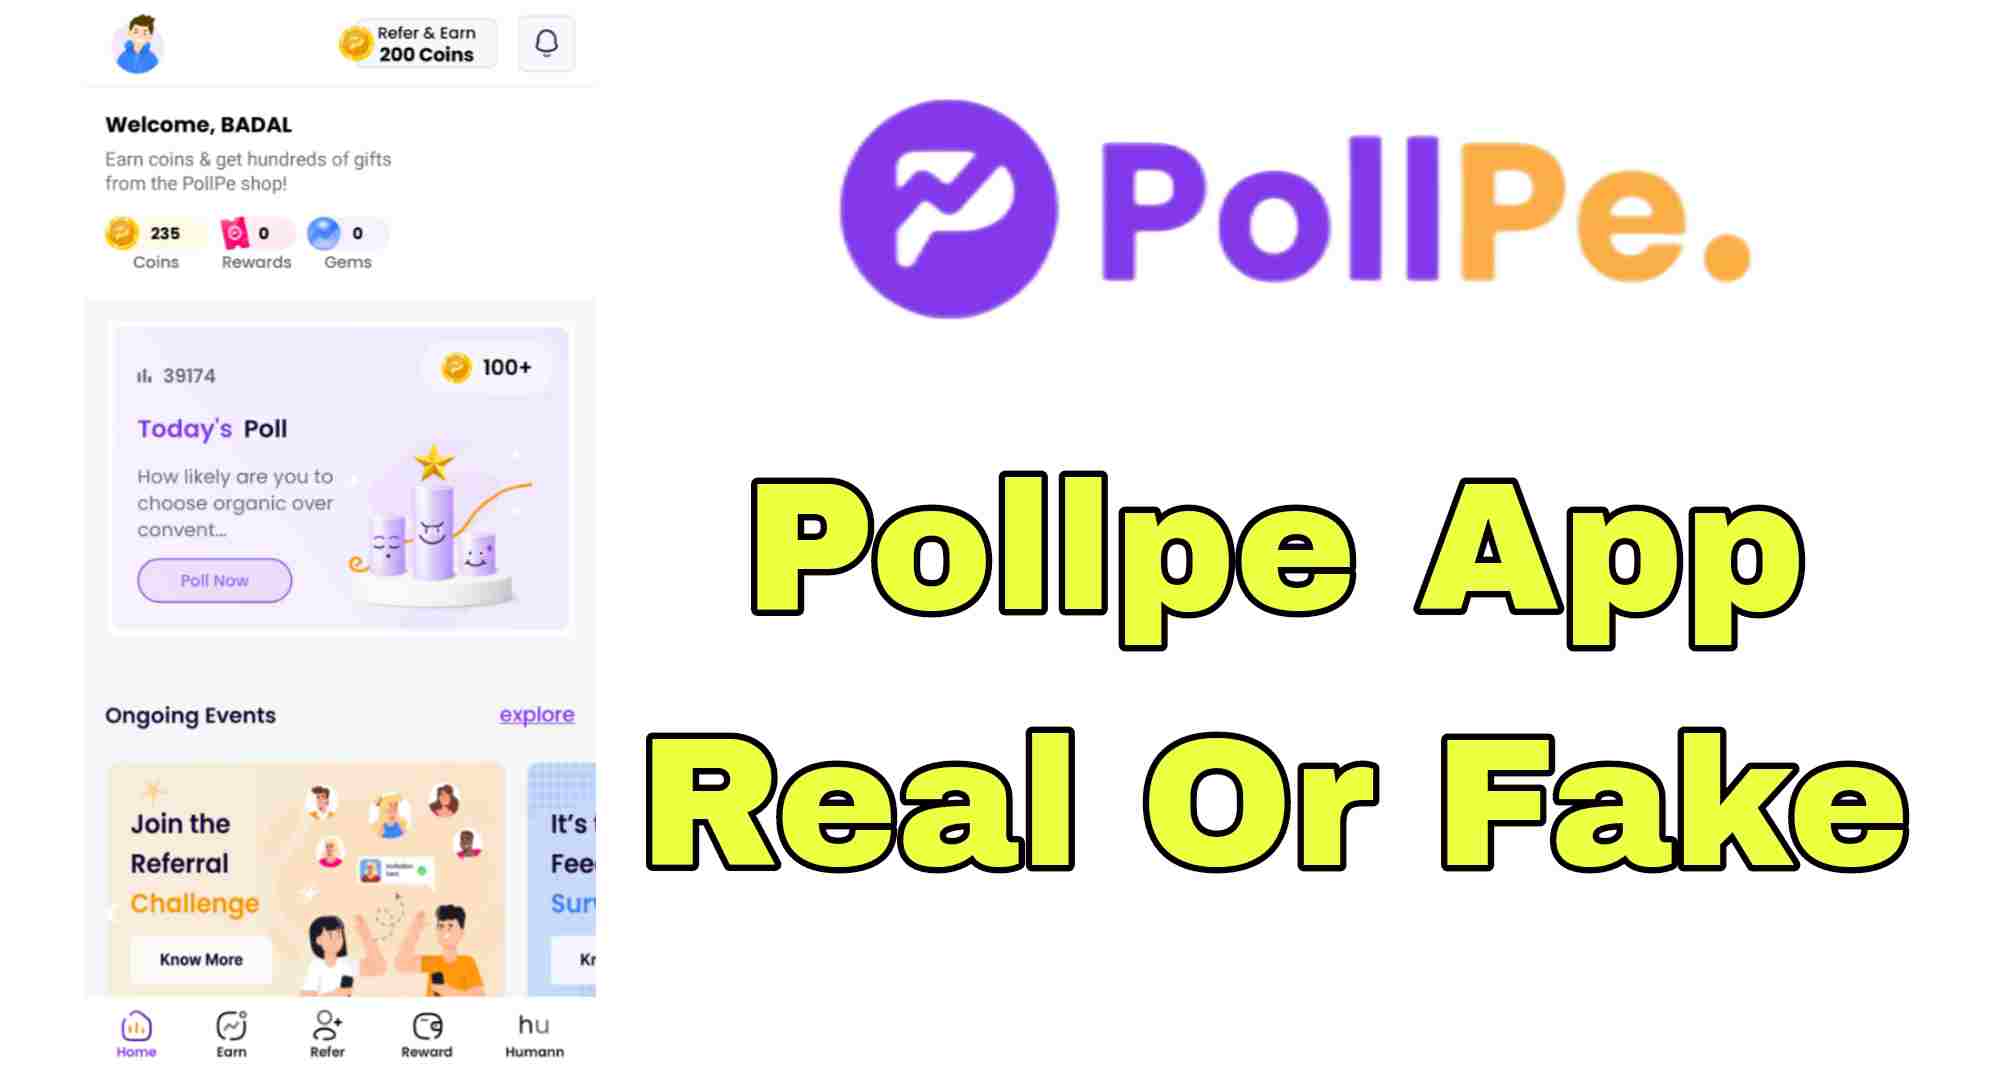 Pollpe App Real Or Fake